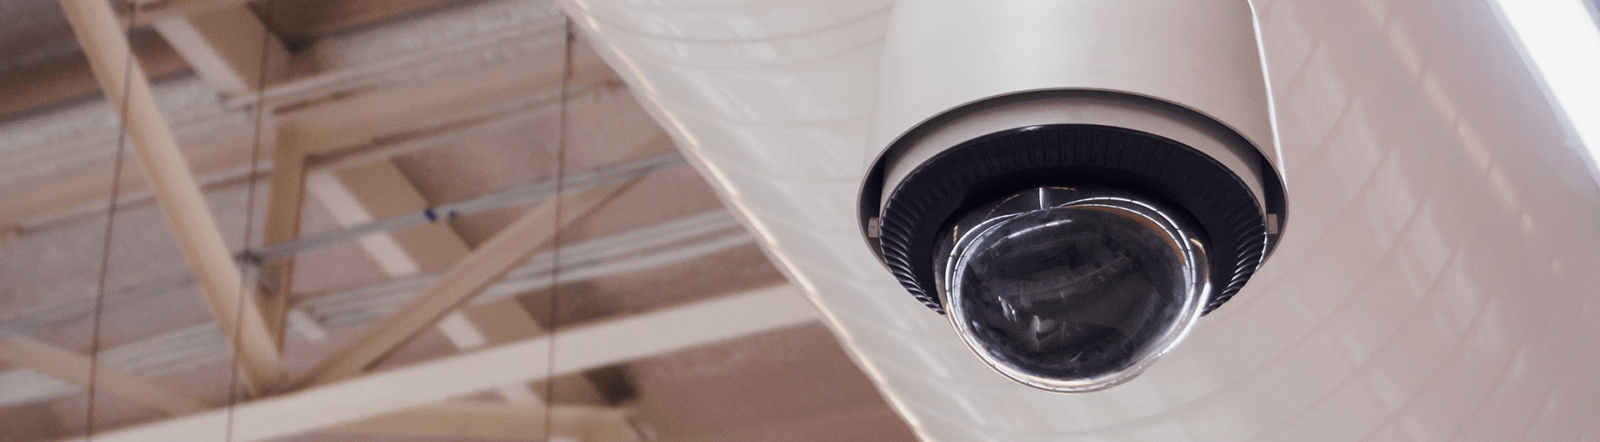 Security camera mounted on ceiling.